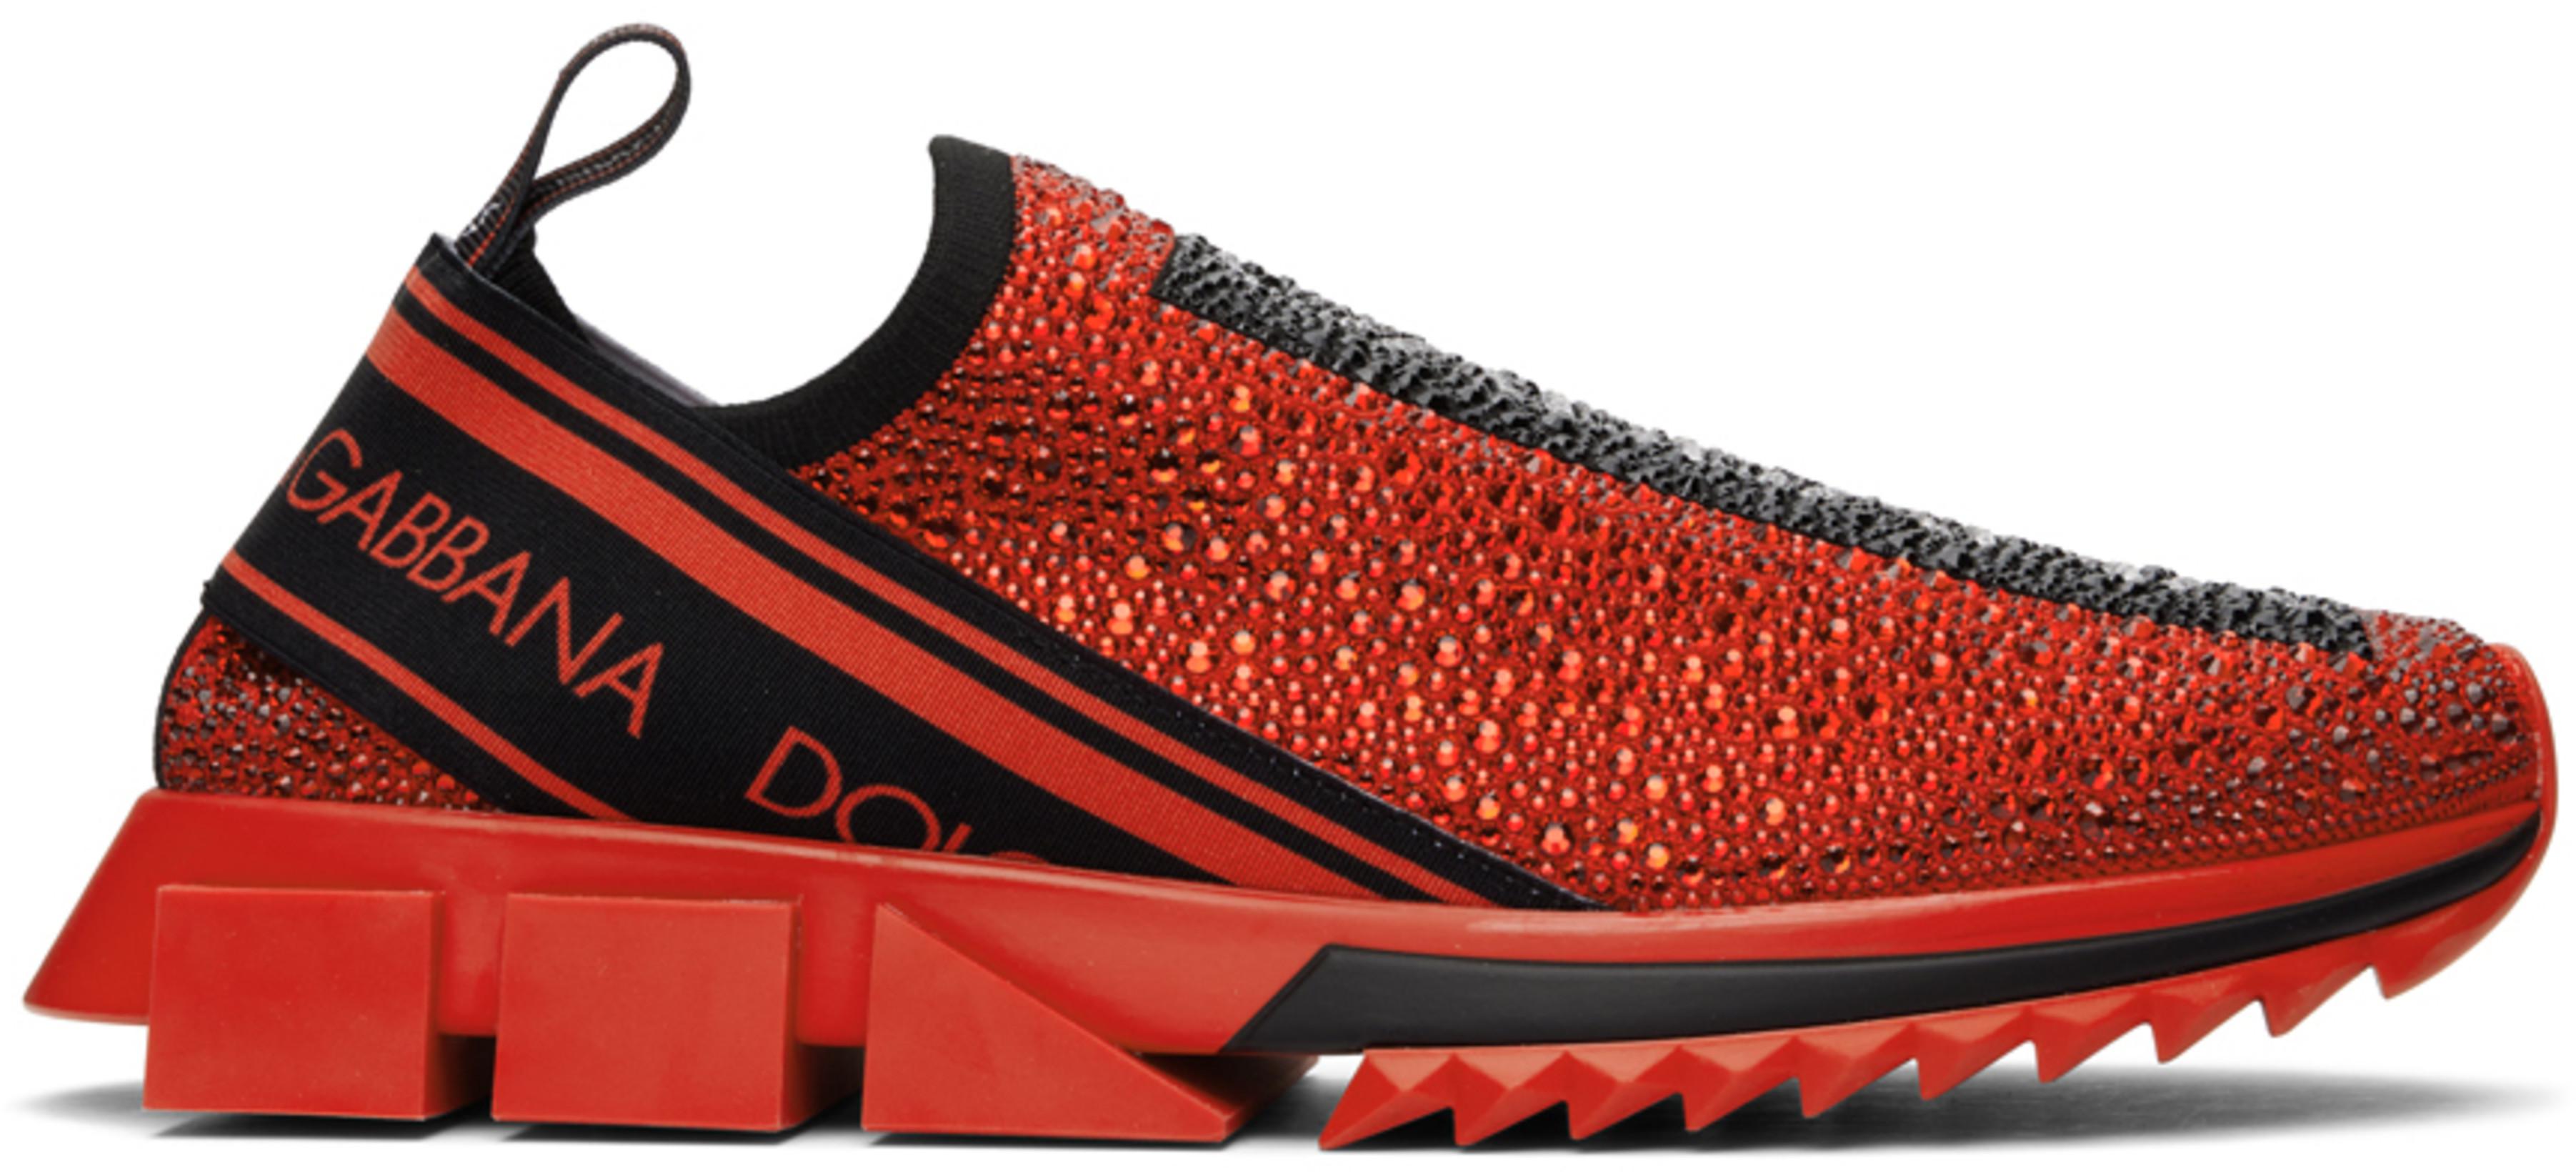 Red Sorrento Sneakers by DOLCE&GABBANA